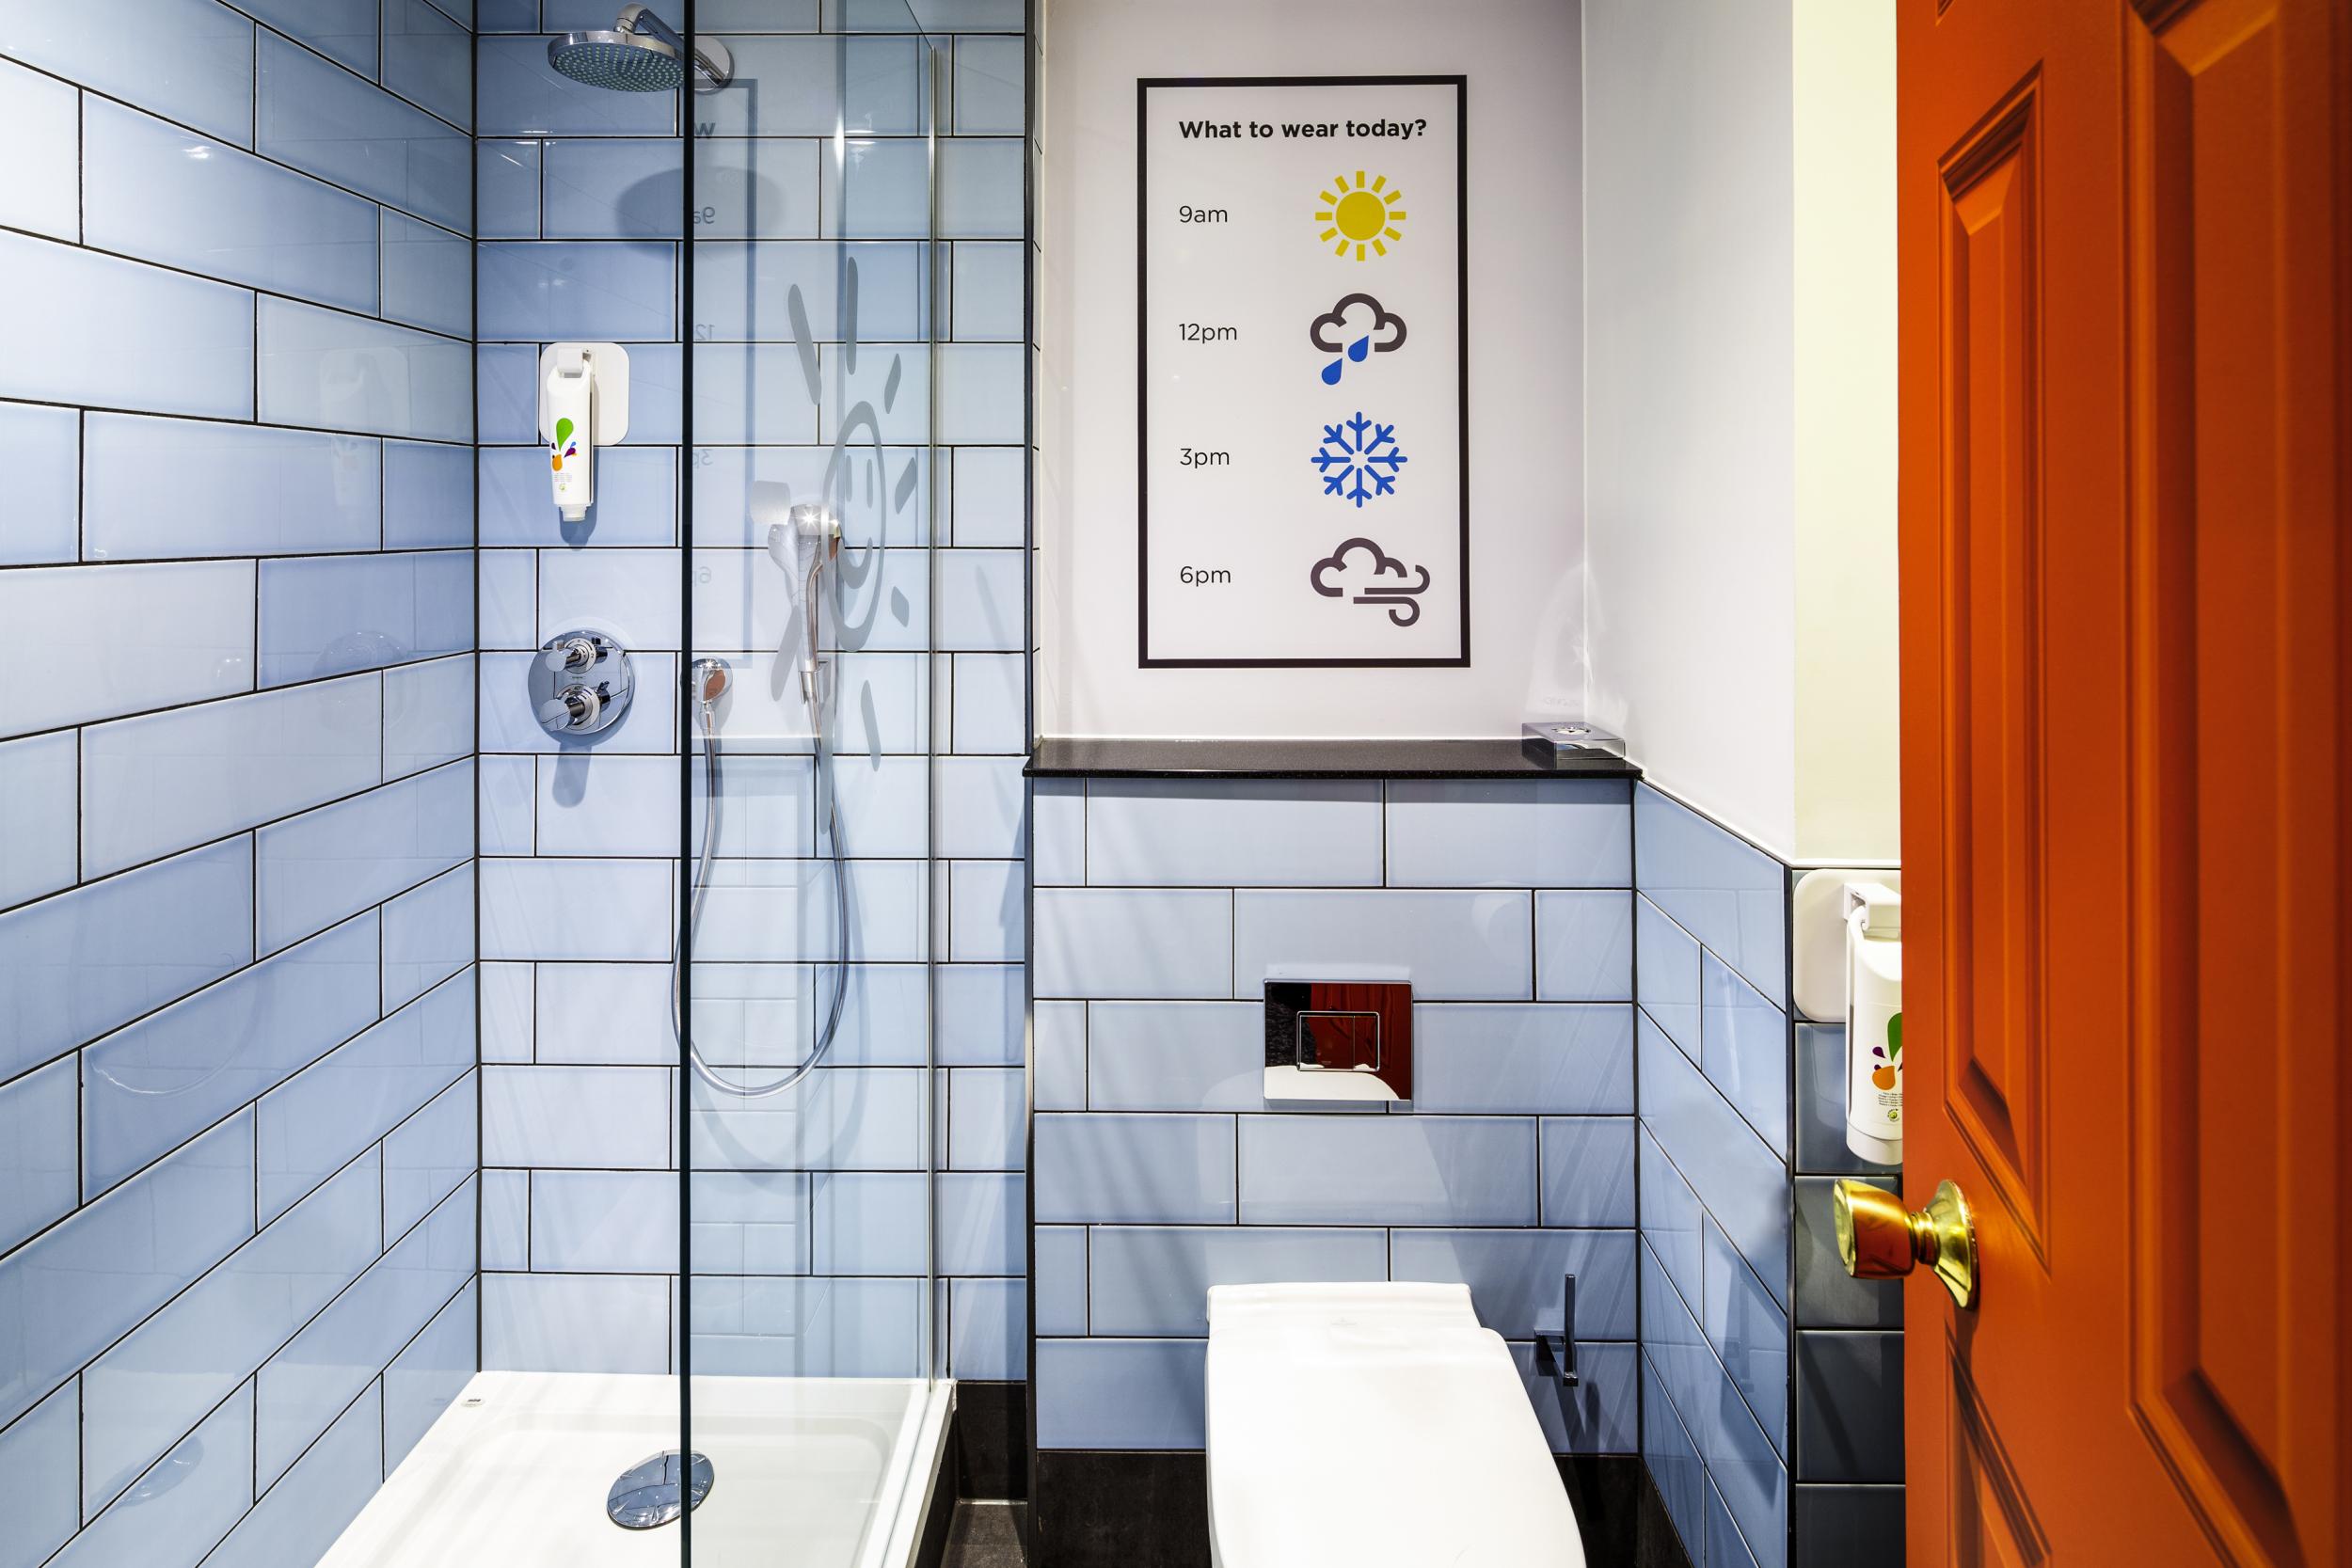 Manchester's unpredictable weather is the focus at the ibis Styles Manchester Portland Hotel